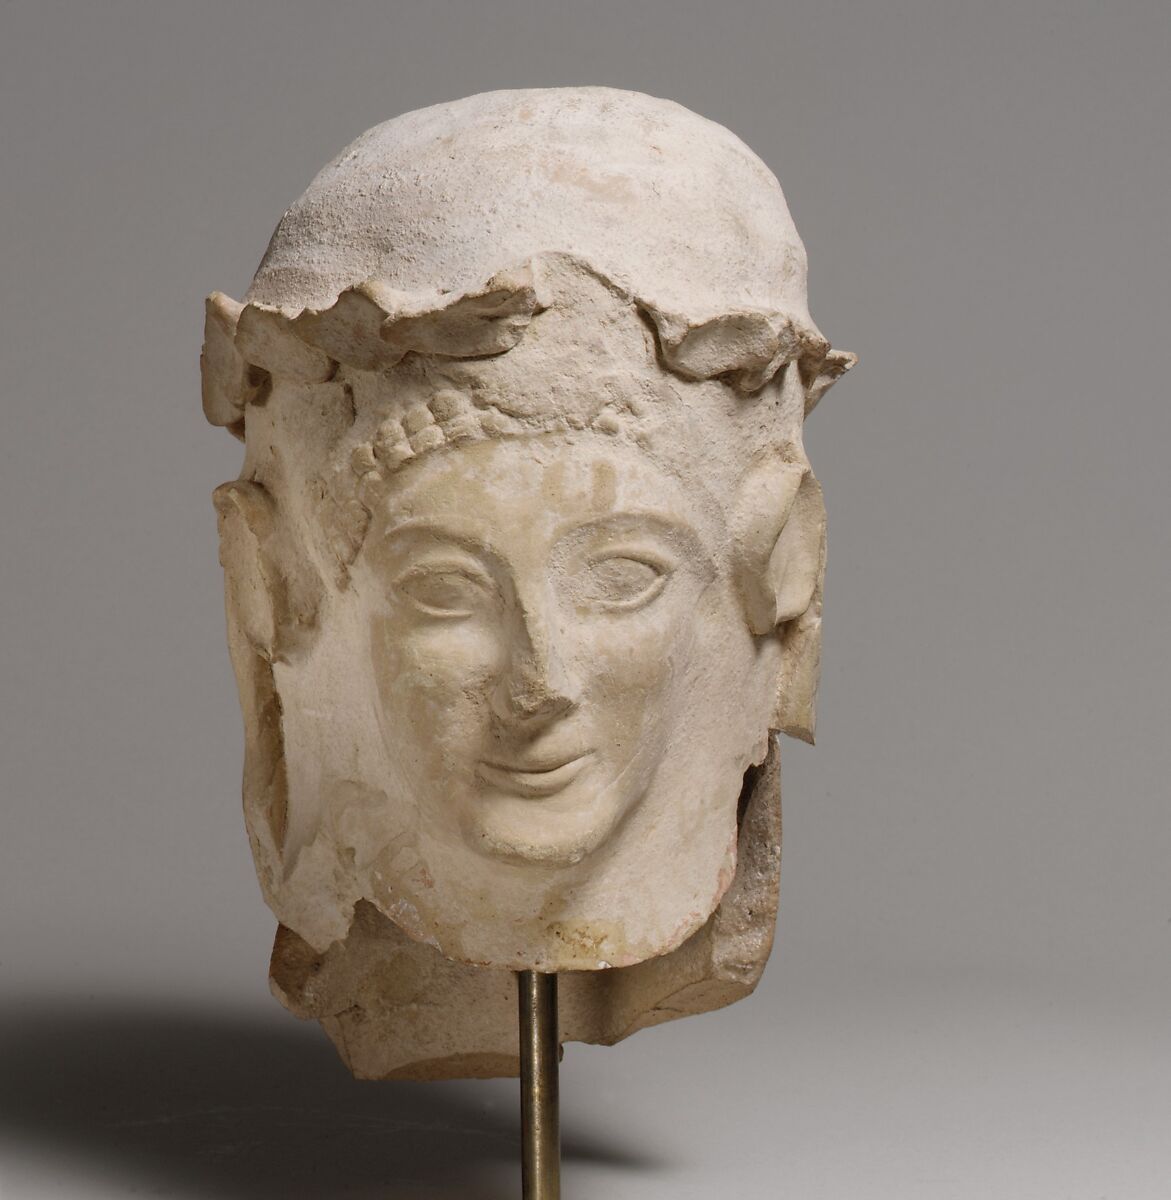 Terracotta head with wreath, Terracotta, Cypriot 